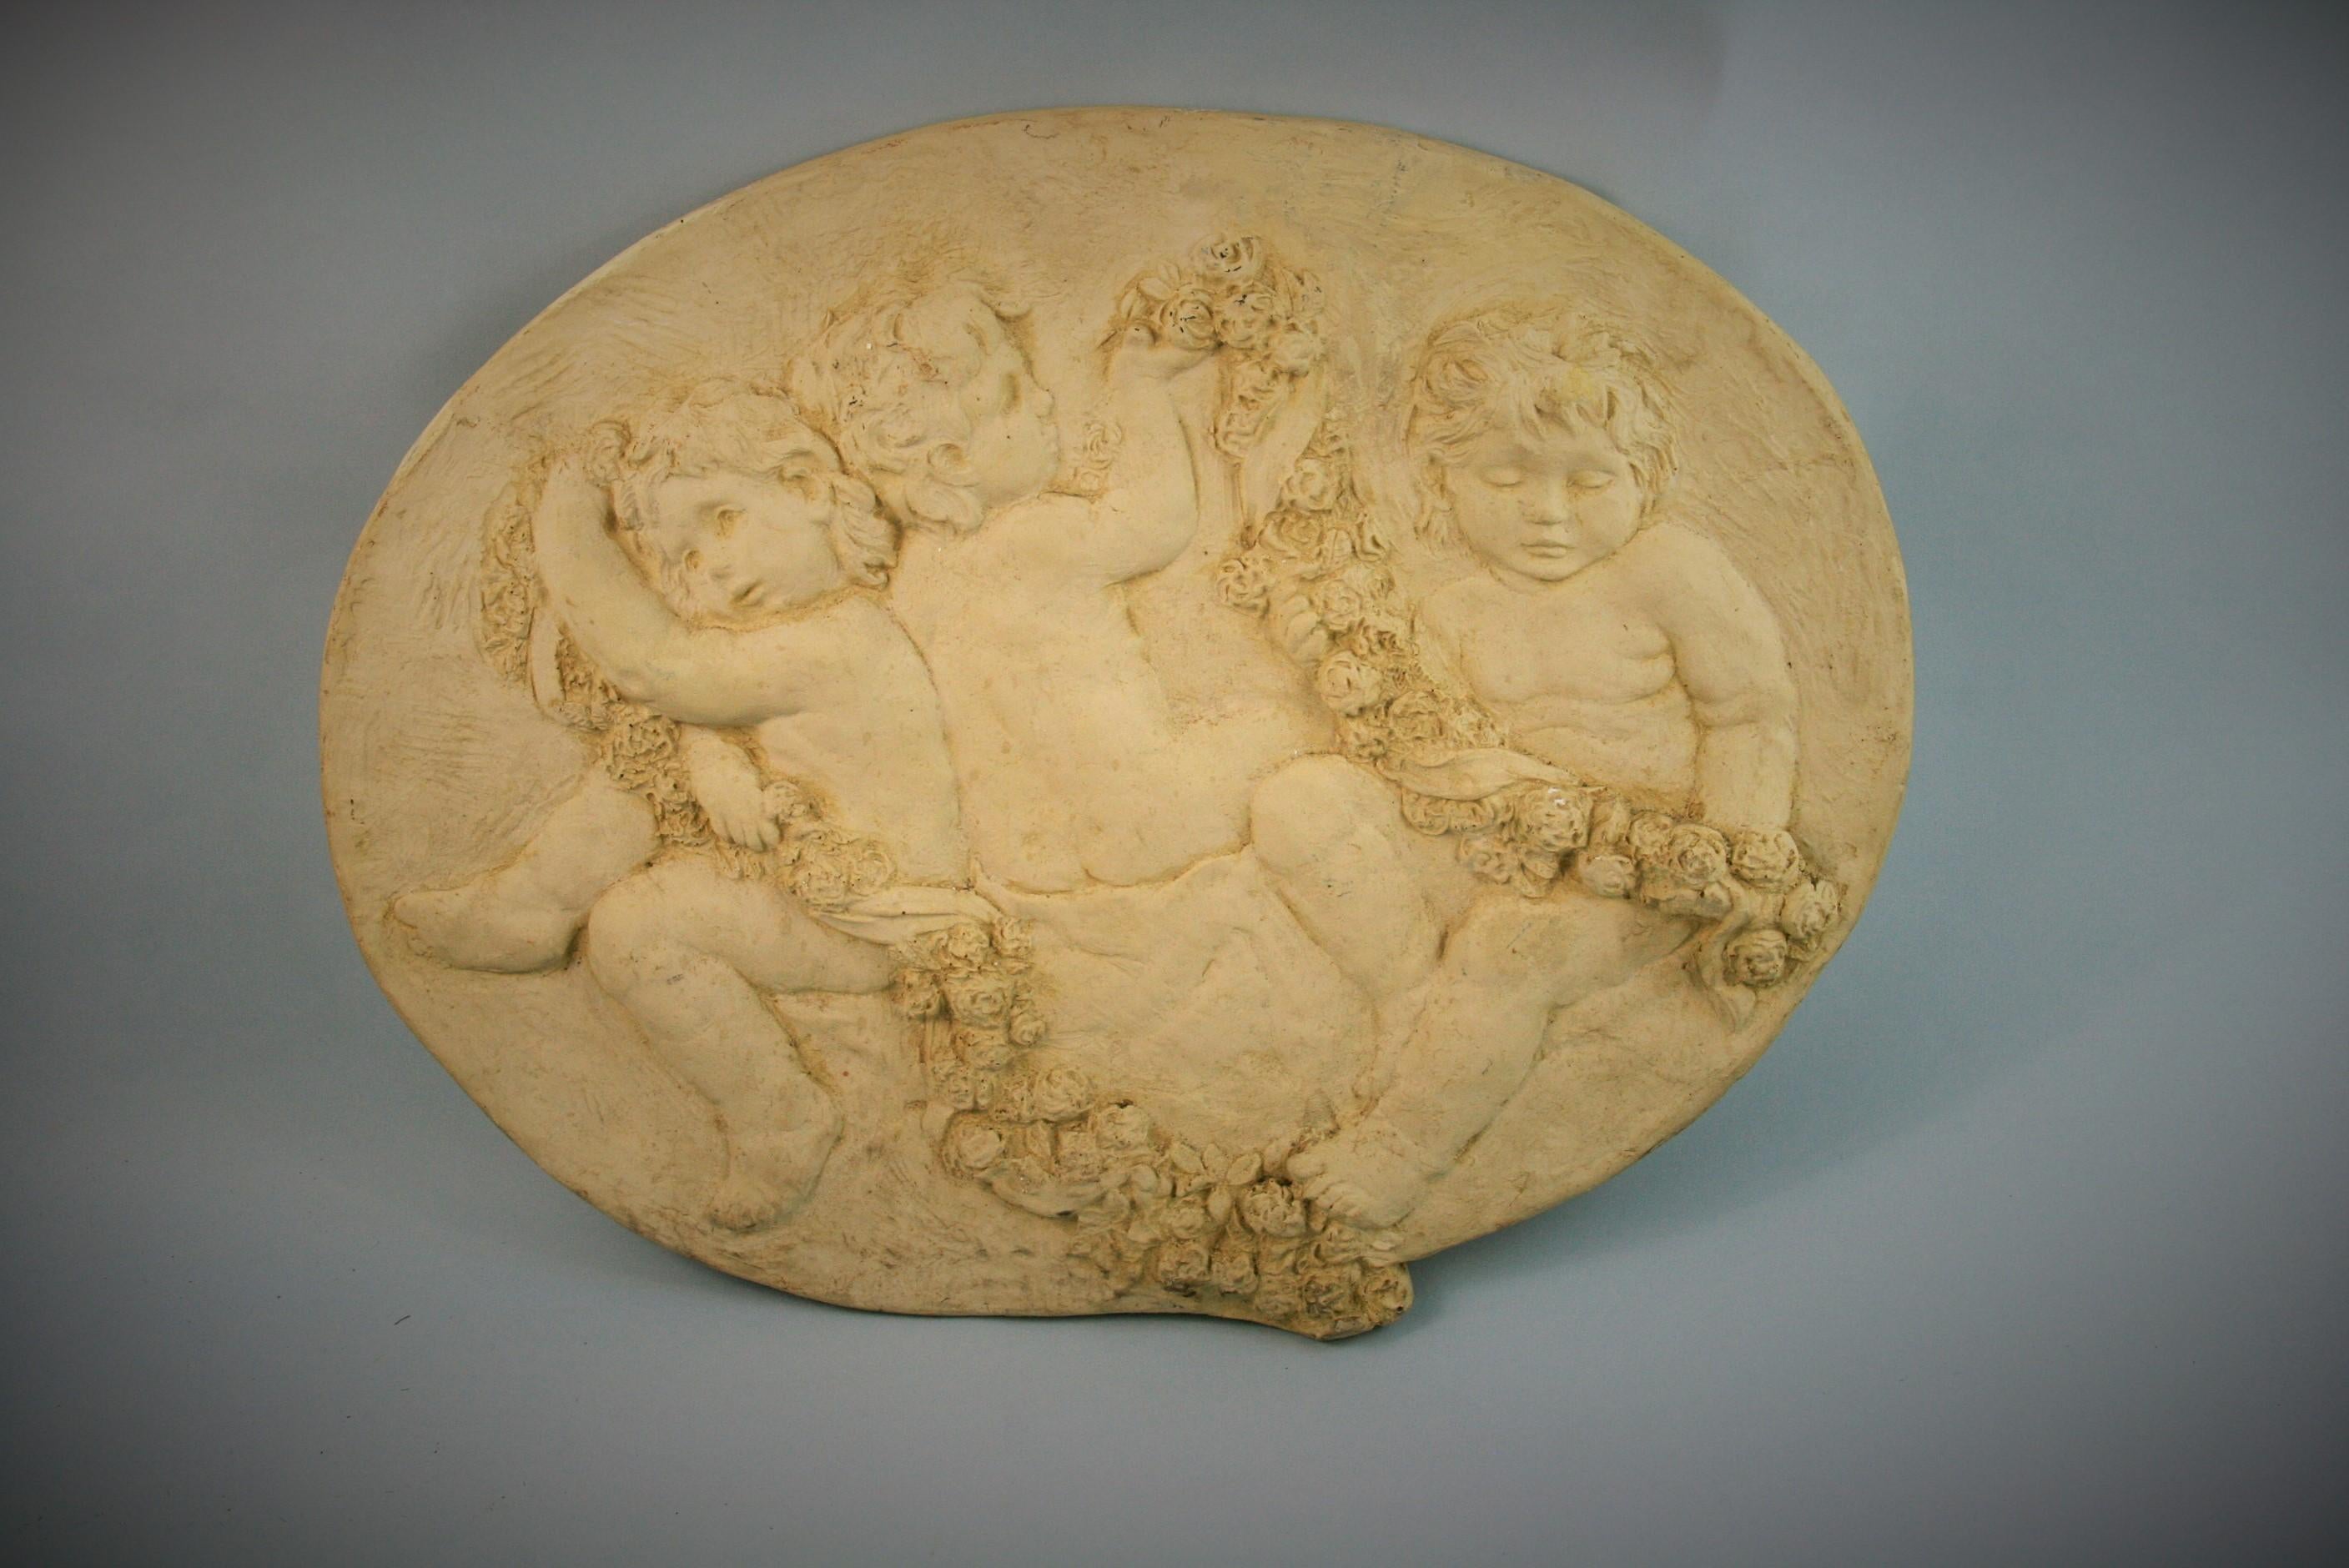 3-523 Hand case gesso putti (angels) wall plaque.